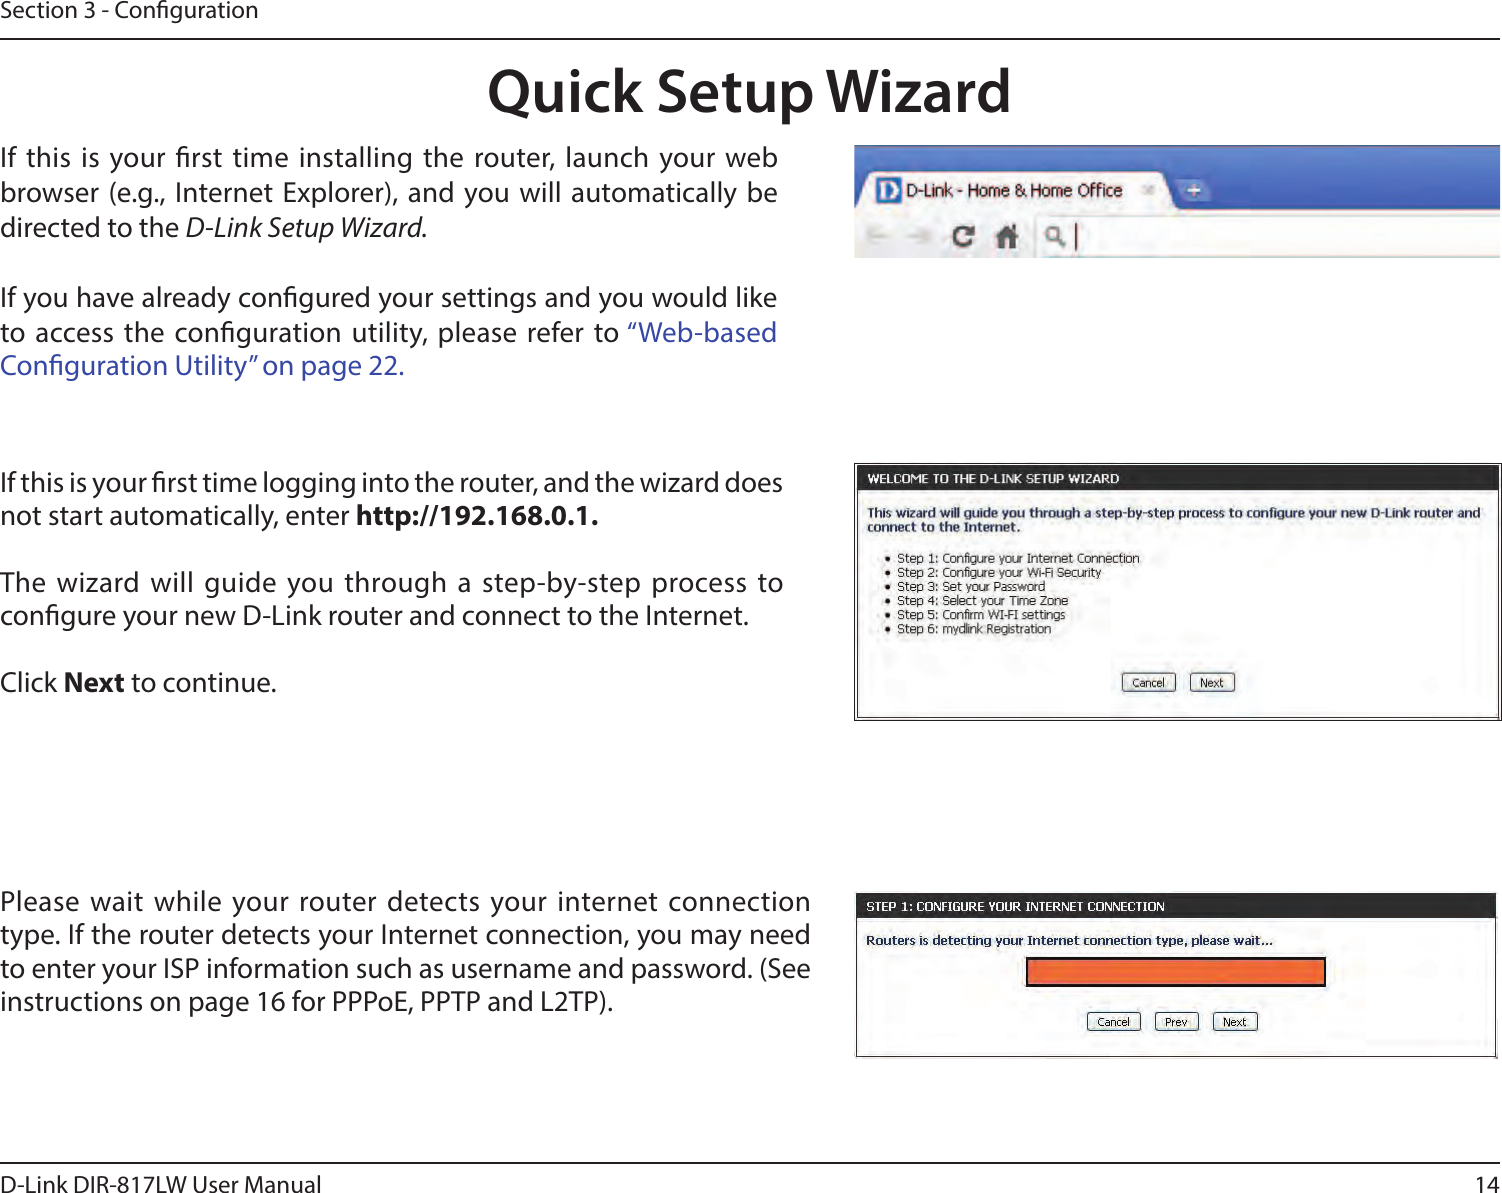 14D-Link DIR-817LW User ManualSection 3 - CongurationIf this is your rst time logging into the router, and the wizard does not start automatically, enter http://192.168.0.1.The wizard will  guide you through a step-by-step process to congure your new D-Link router and connect to the Internet.Click Next to continue. Quick Setup WizardIf this is  your rst  time installing the  router, launch  your web browser  (e.g., Internet Explorer), and you will automatically be directed to the D-Link Setup Wizard. If you have already congured your settings and you would like to access the conguration utility, please refer to “Web-based Conguration Utility” on page 22.Please wait while your router detects your internet connection type. If the router detects your Internet connection, you may need to enter your ISP information such as username and password. (See instructions on page 16 for PPPoE, PPTP and L2TP).